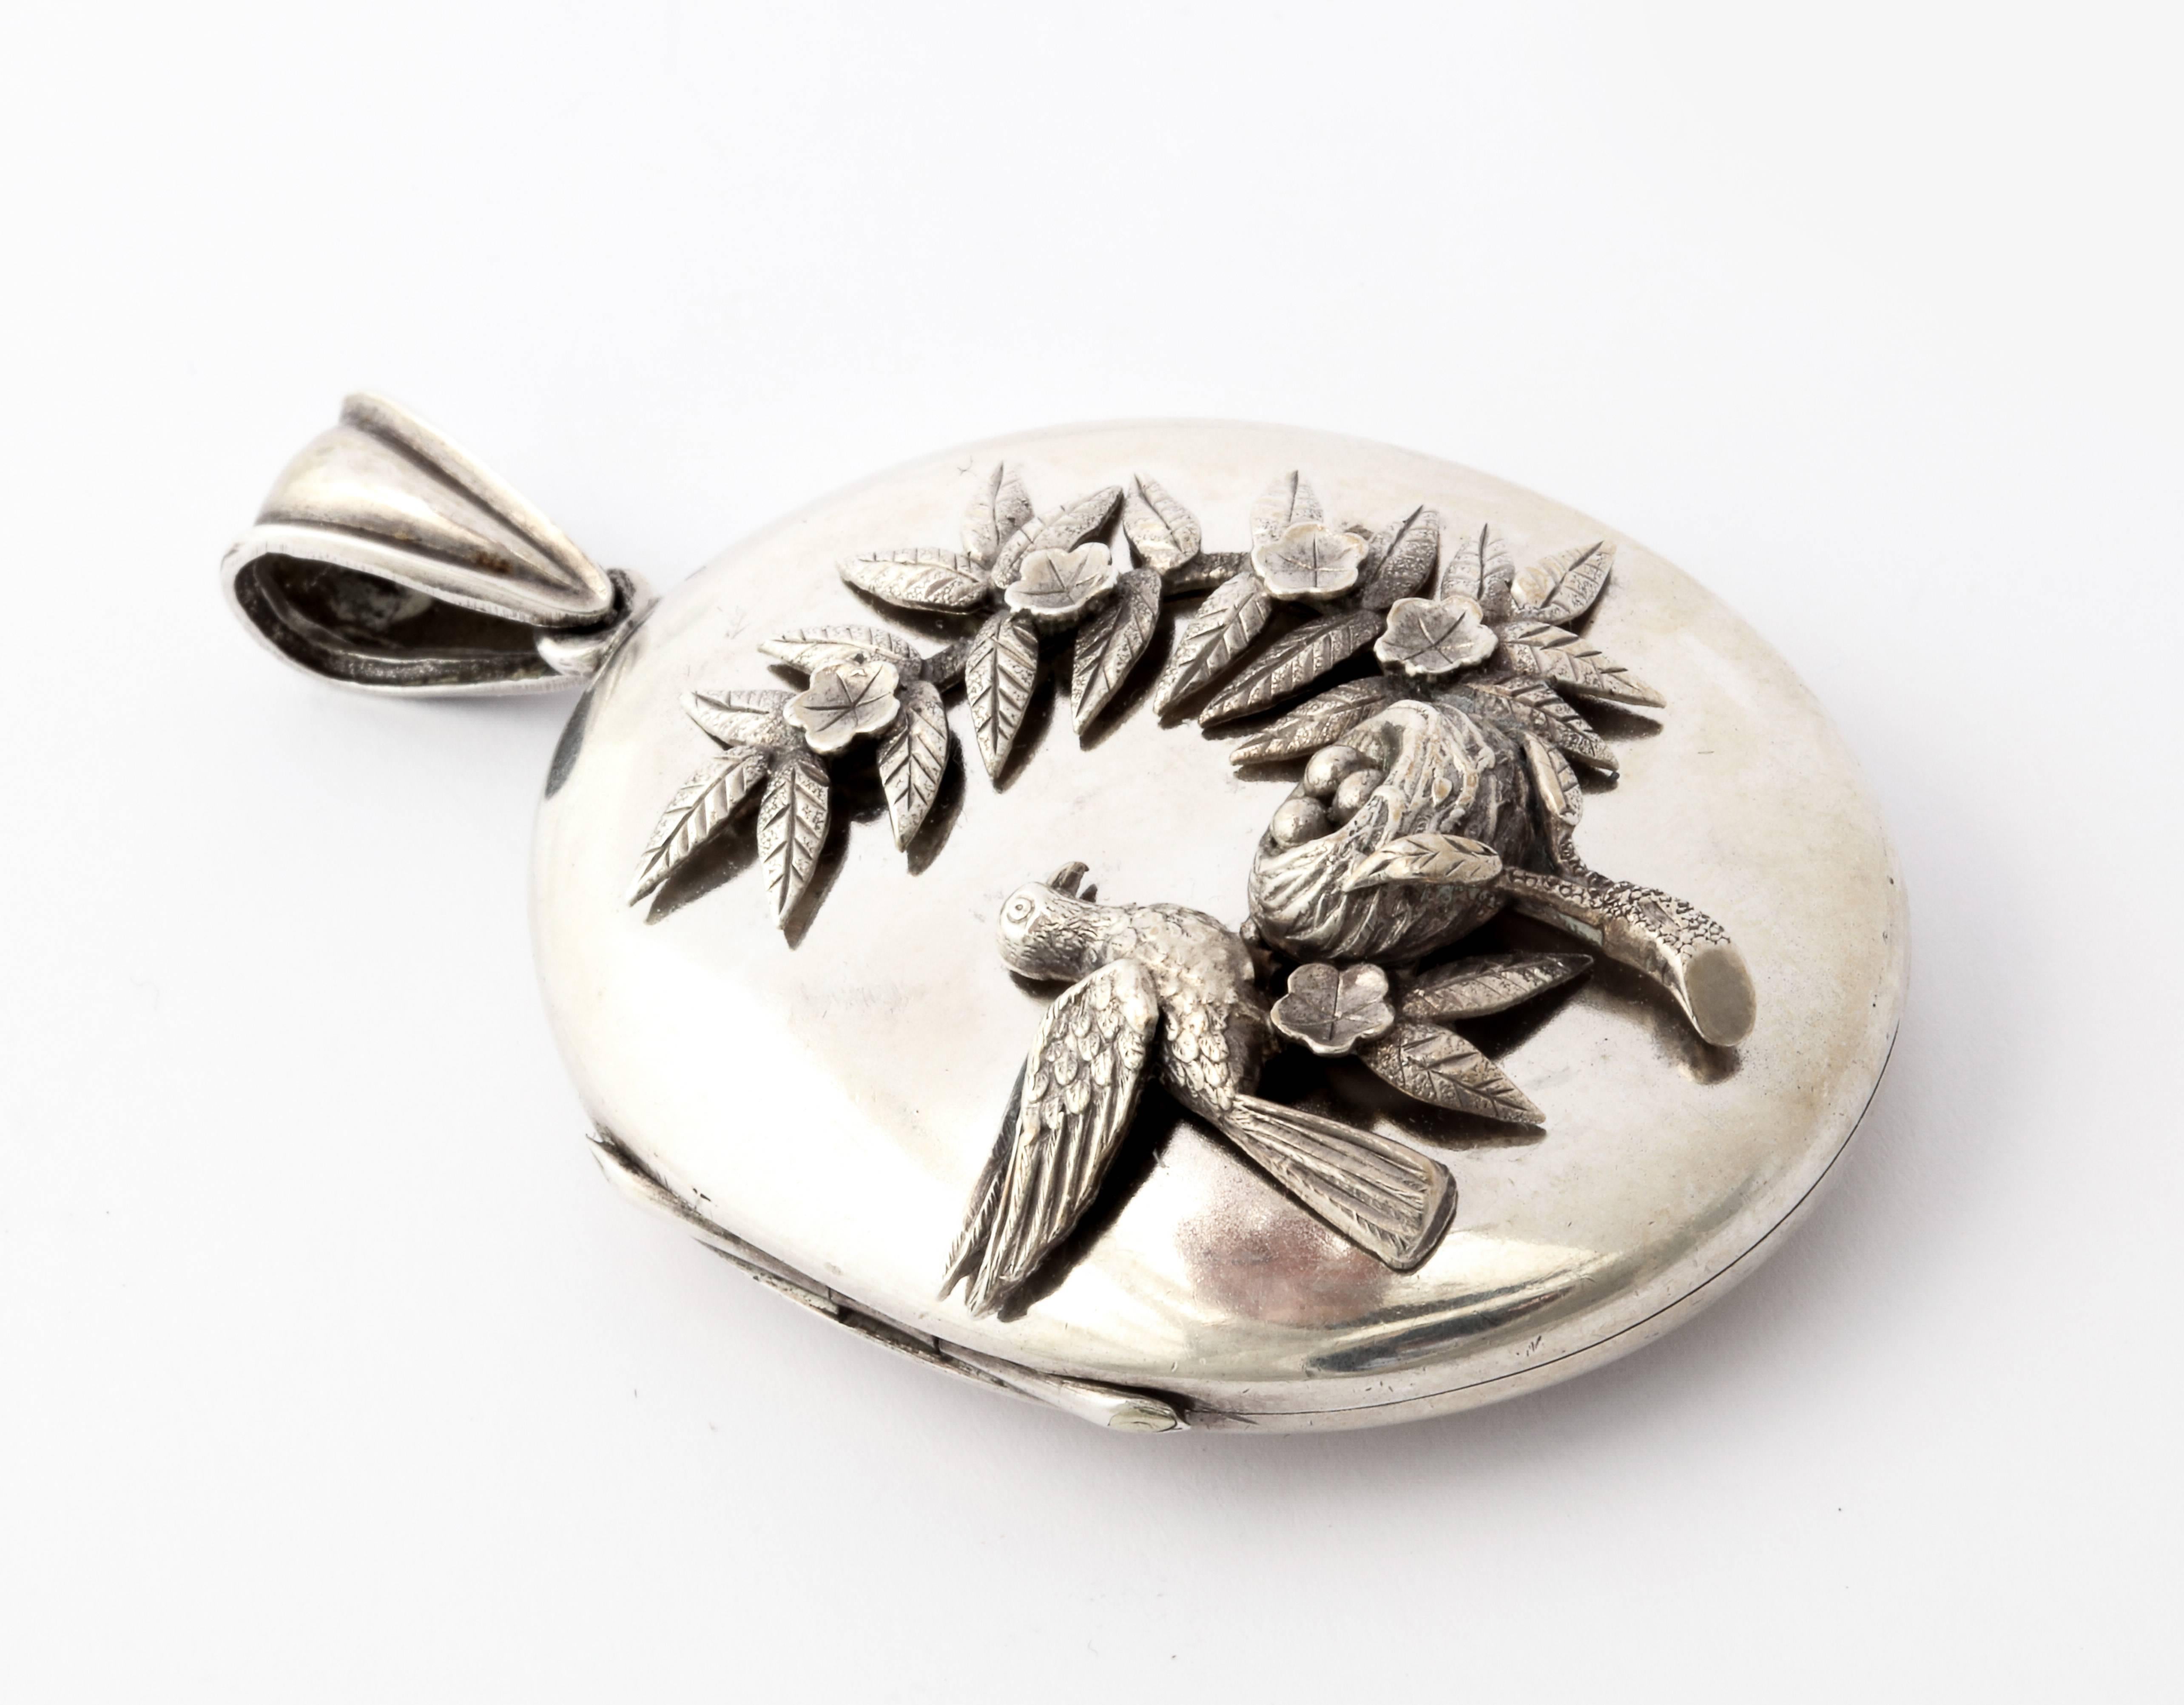 A very lovable locket proudly shows a highly detailed relief of a parent bird at its nest, overseeing three eggs. The bird's feathers, the nest and the floral spray in which the nest hides are all beautifully and individually engraved and raised